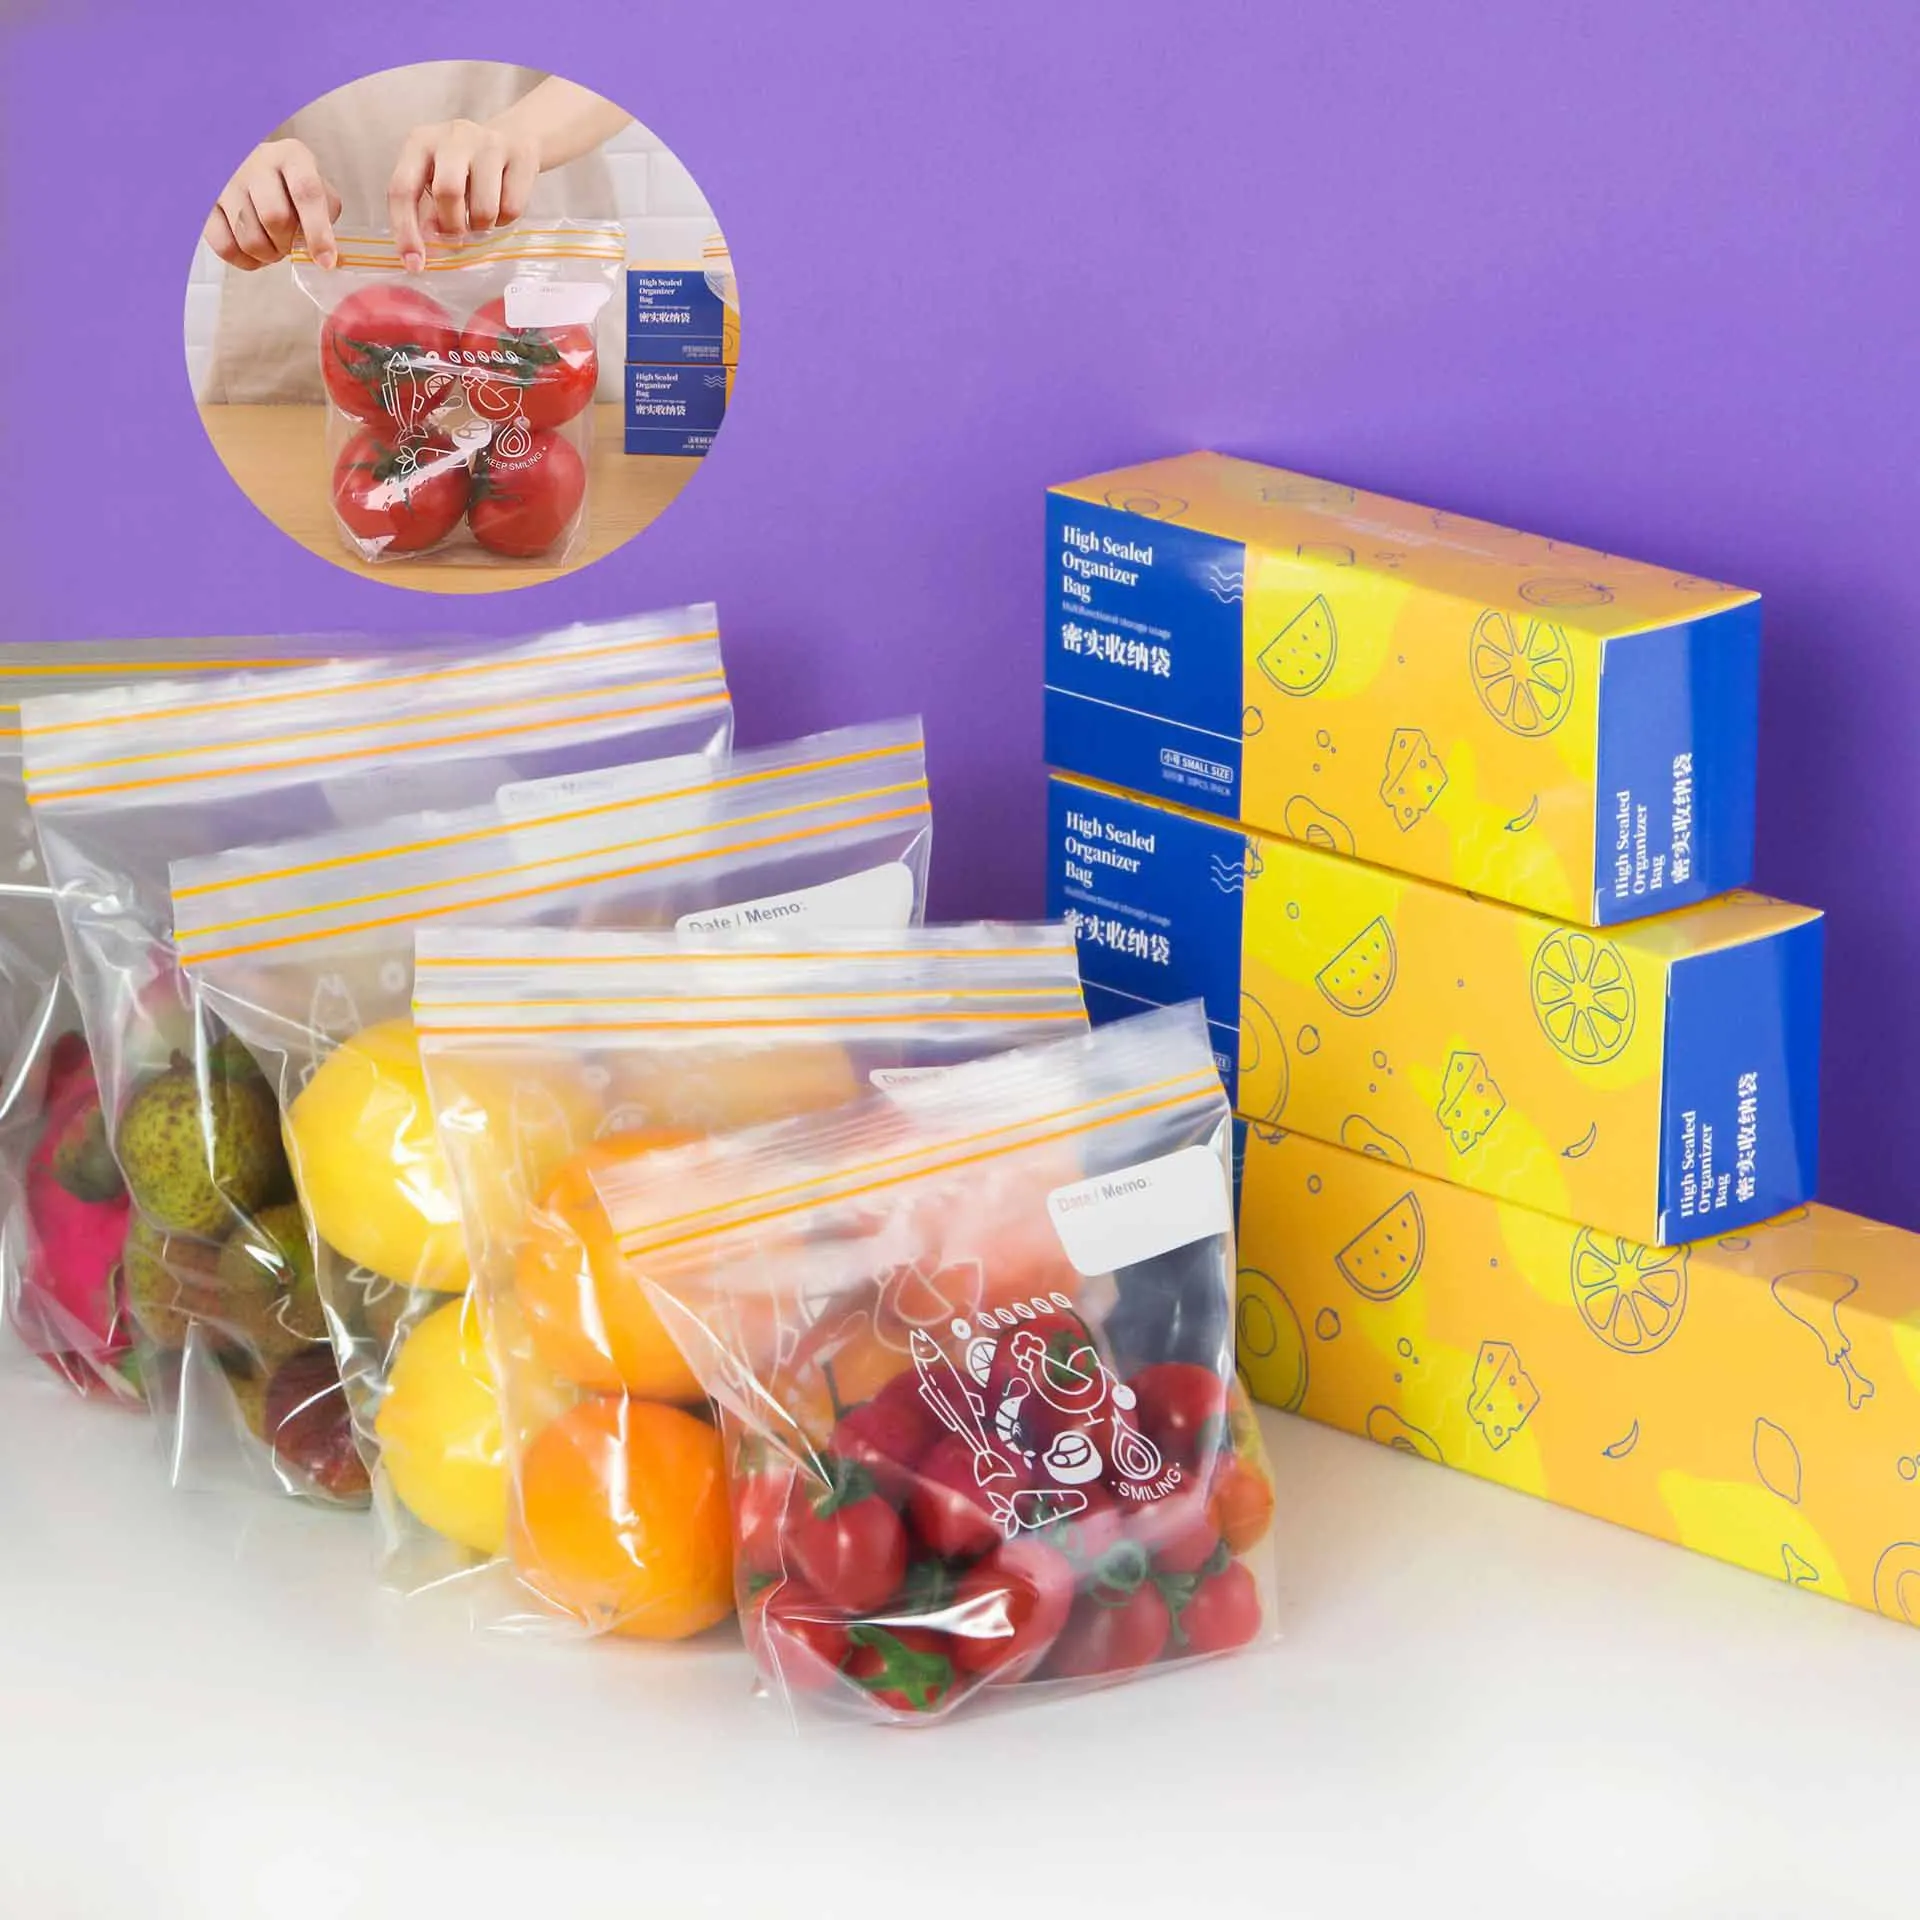 Delove 50pcs Airtight Standable Food Storage Bags - Family Daily